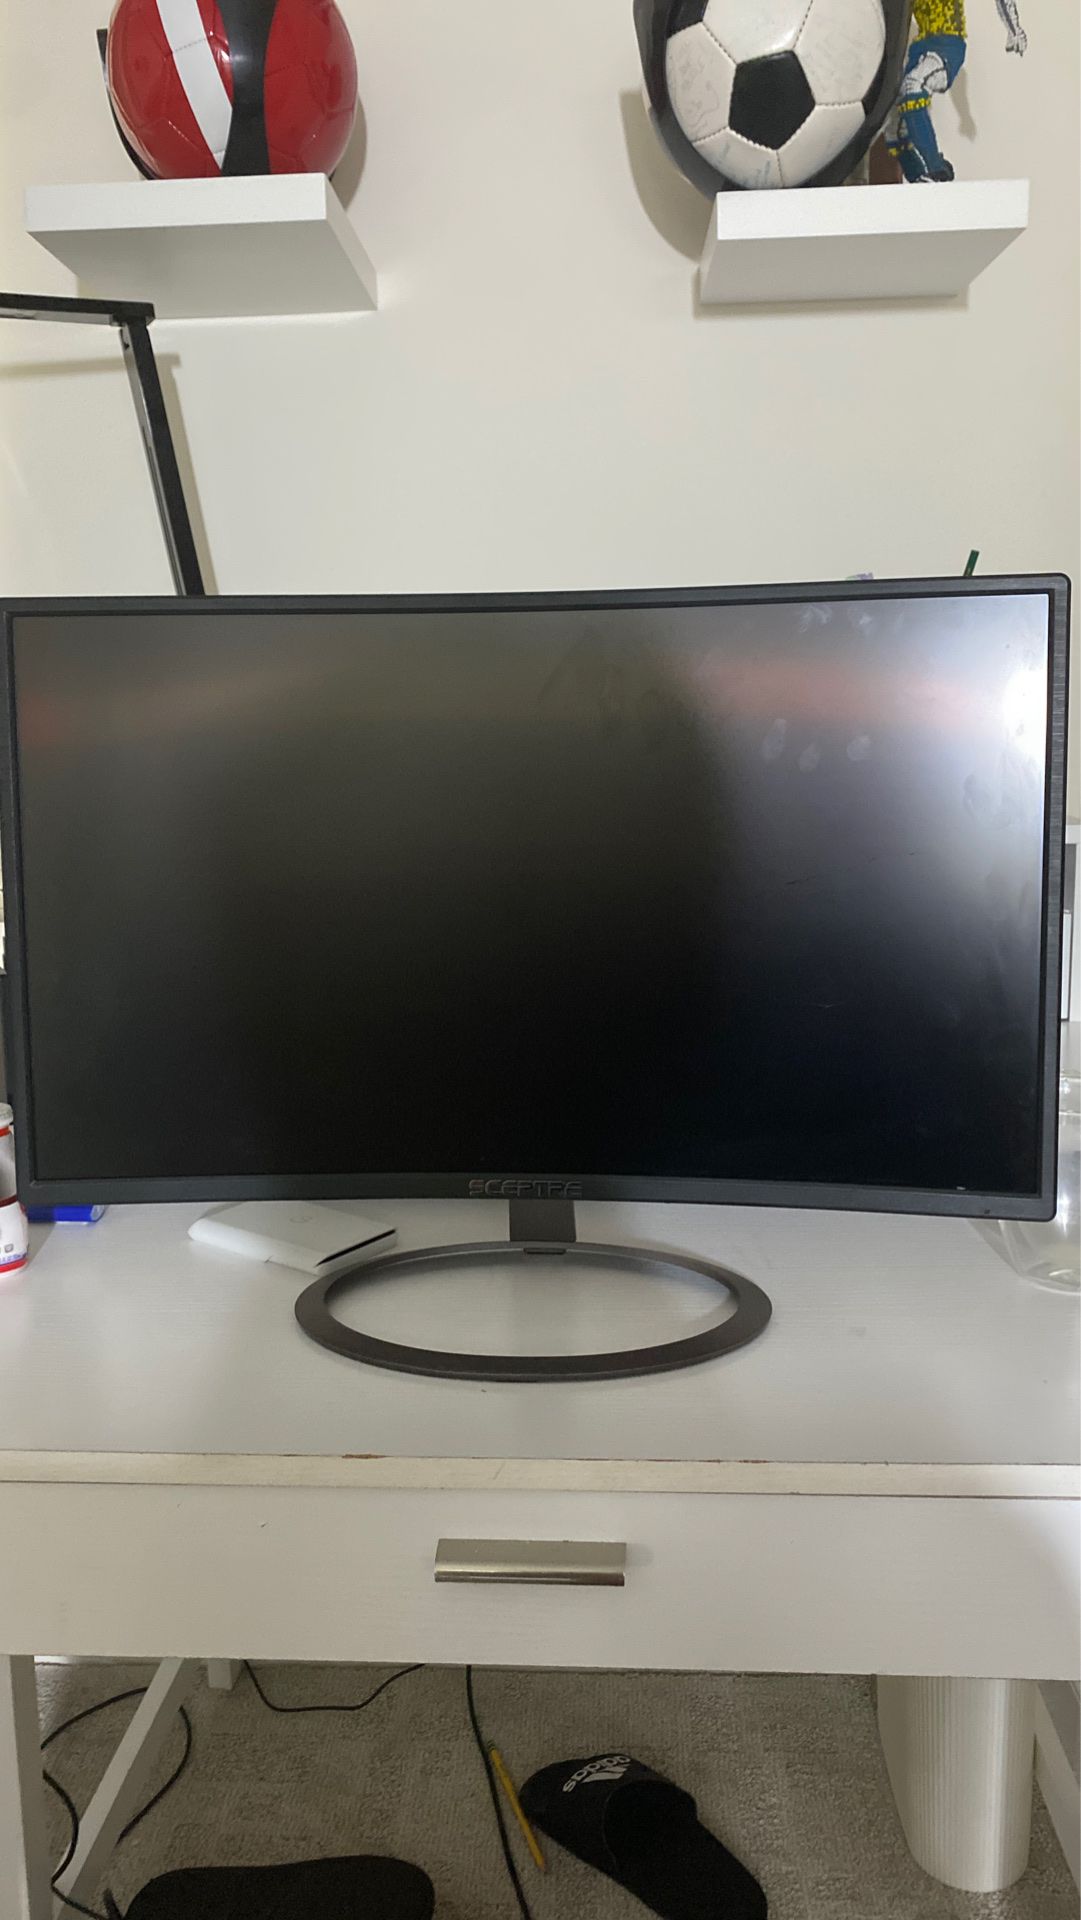 Scepter gaming curved screen 24 inch monitor